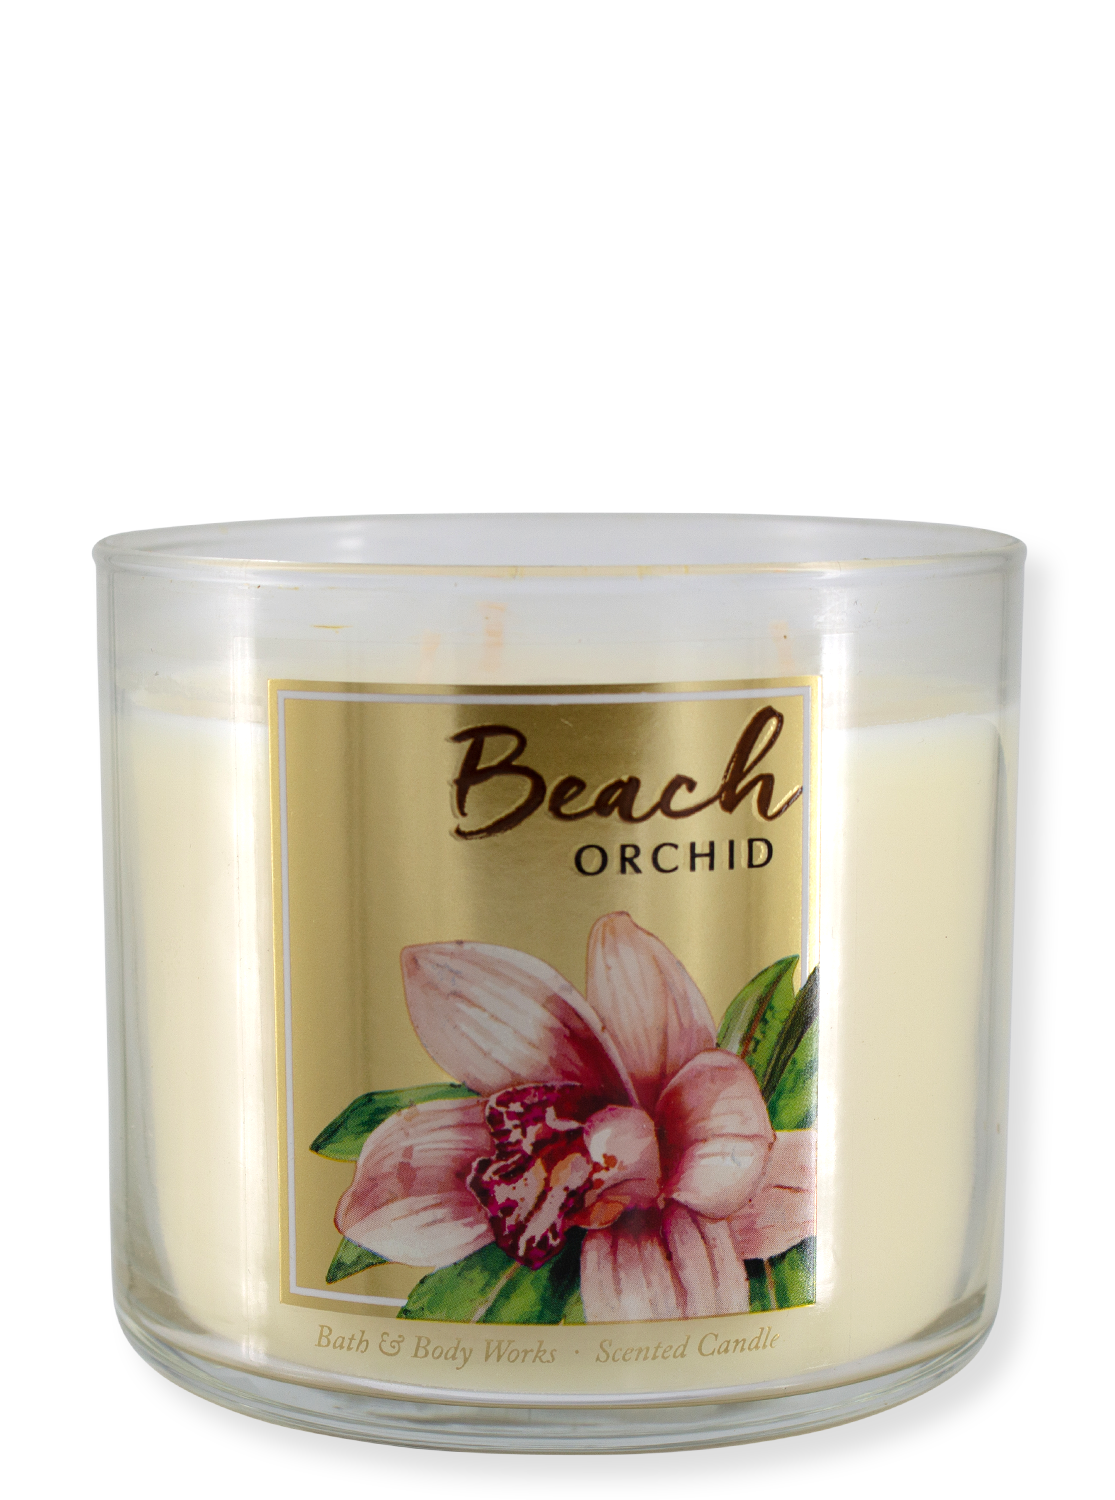 Rarity - 3-Poke Candle - Beach Orchid - 411g